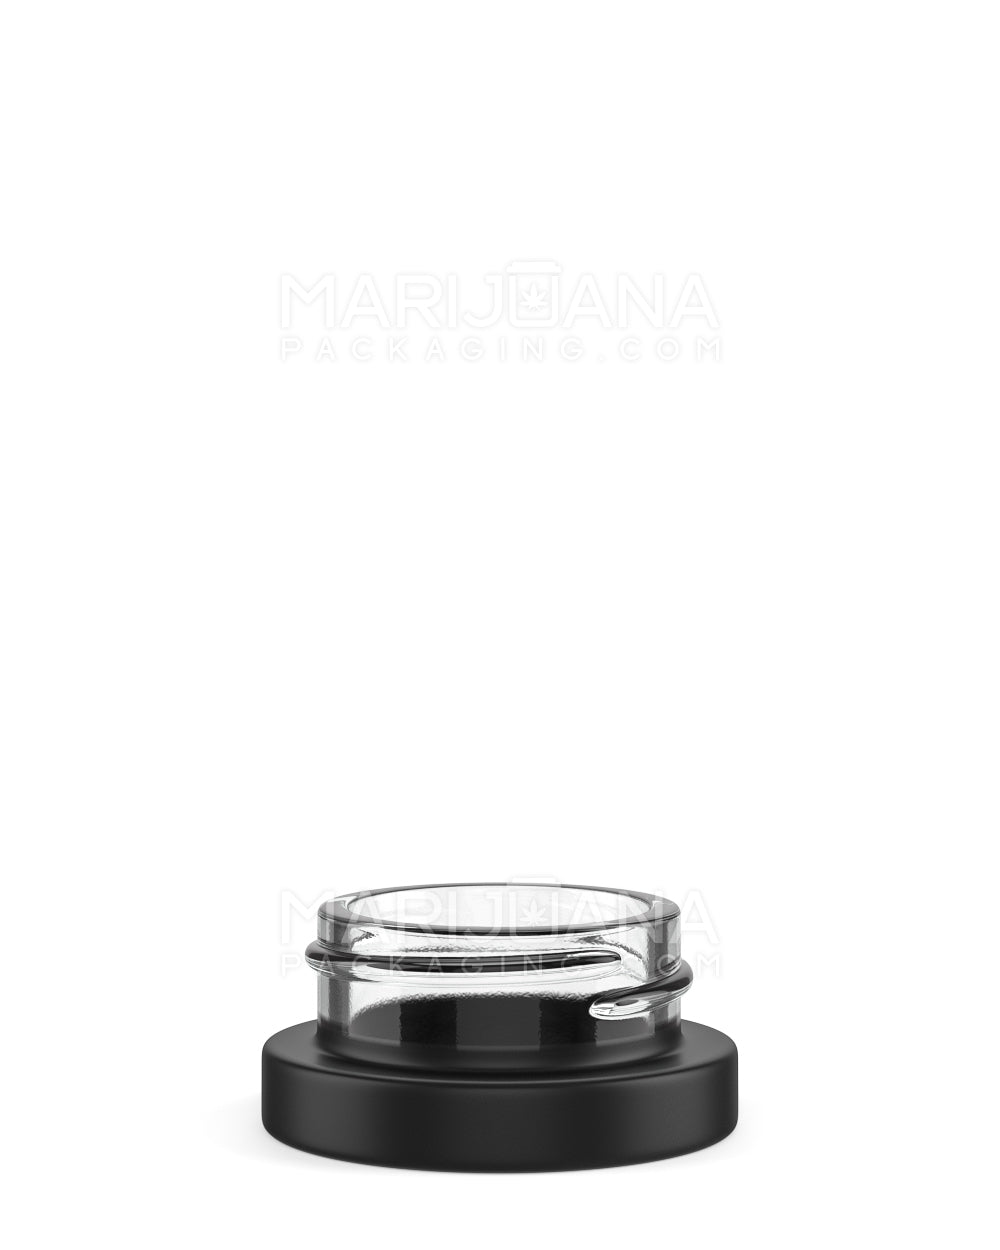 Matte Black Glass Concentrate Containers | 38mm - 9mL - 320 Count - 1